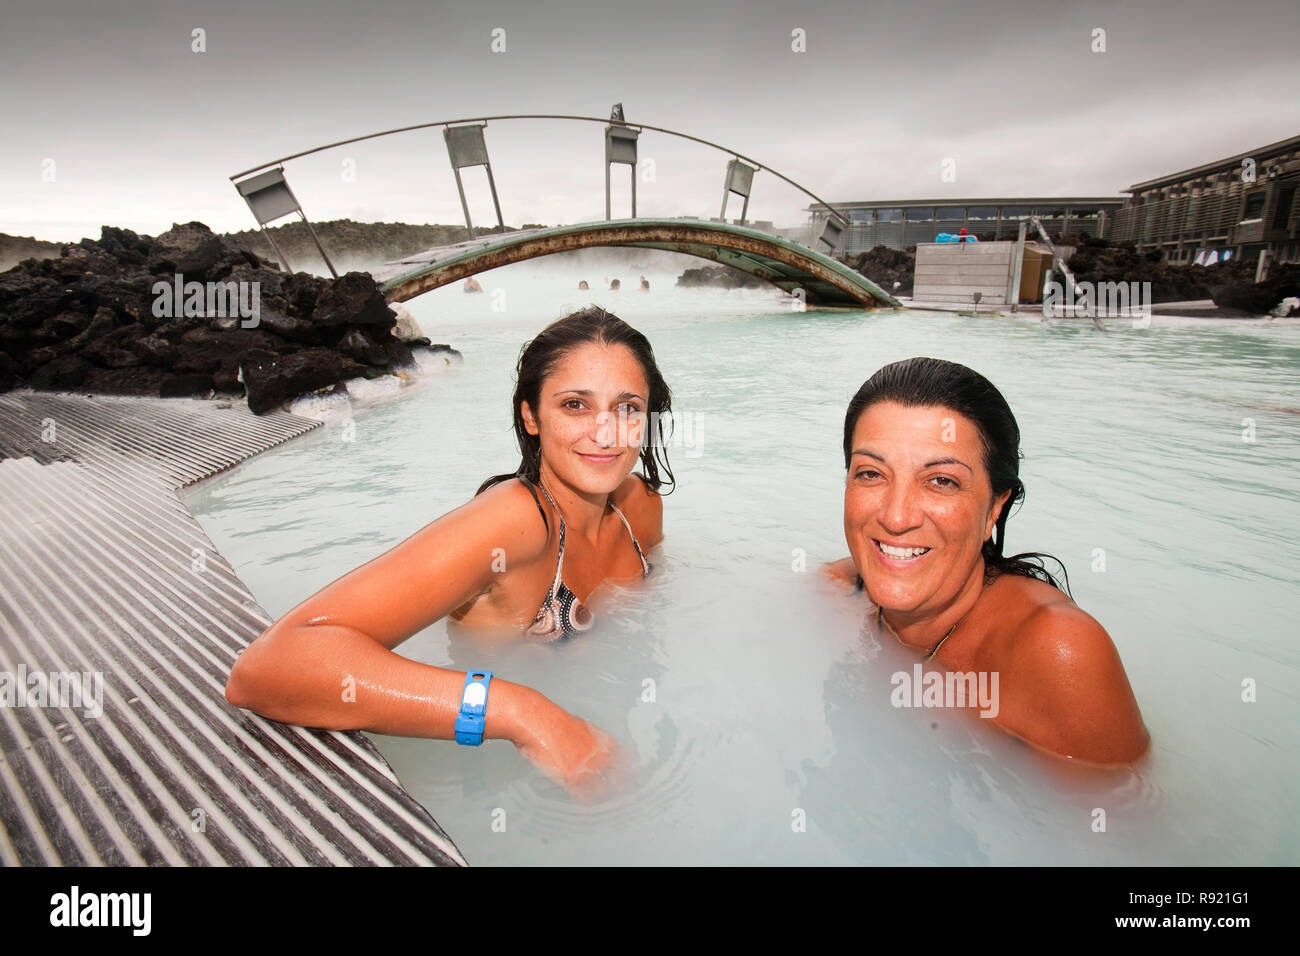 Photograph of two women in relaxing in a hot spring and smiling at camera, Blue Lagoon, Keflavik, Iceland Stock Photo